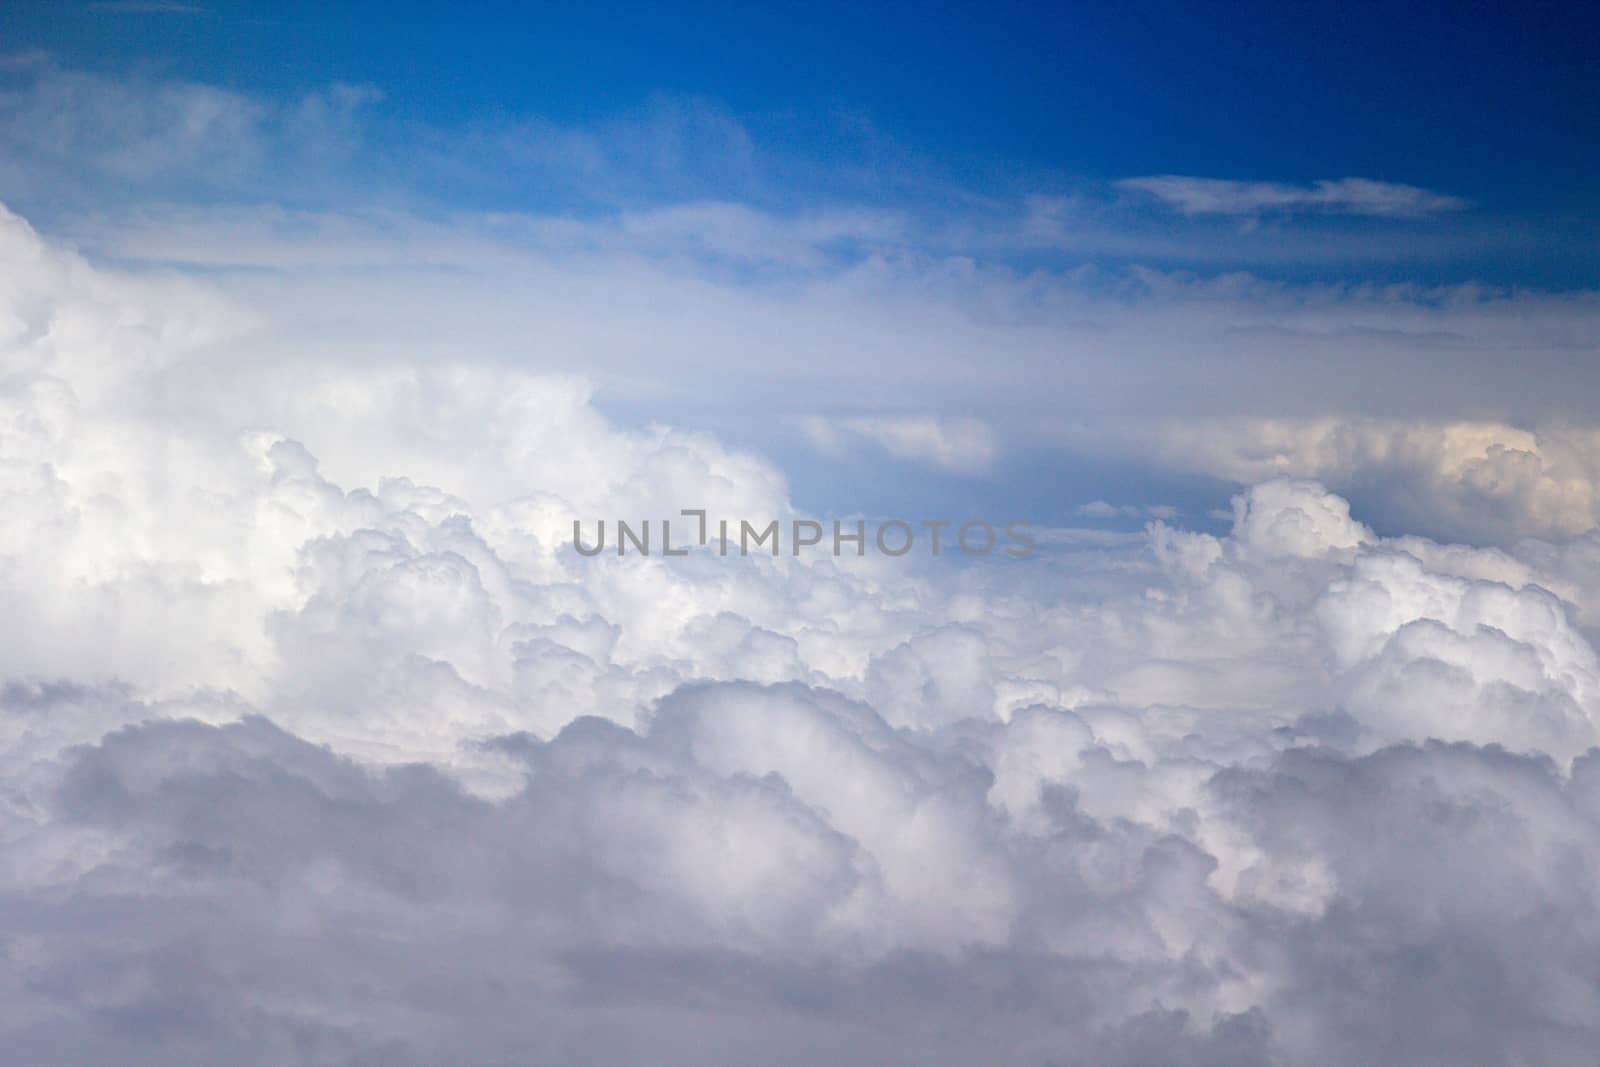 Photo shows details of white clouds and blue sky.